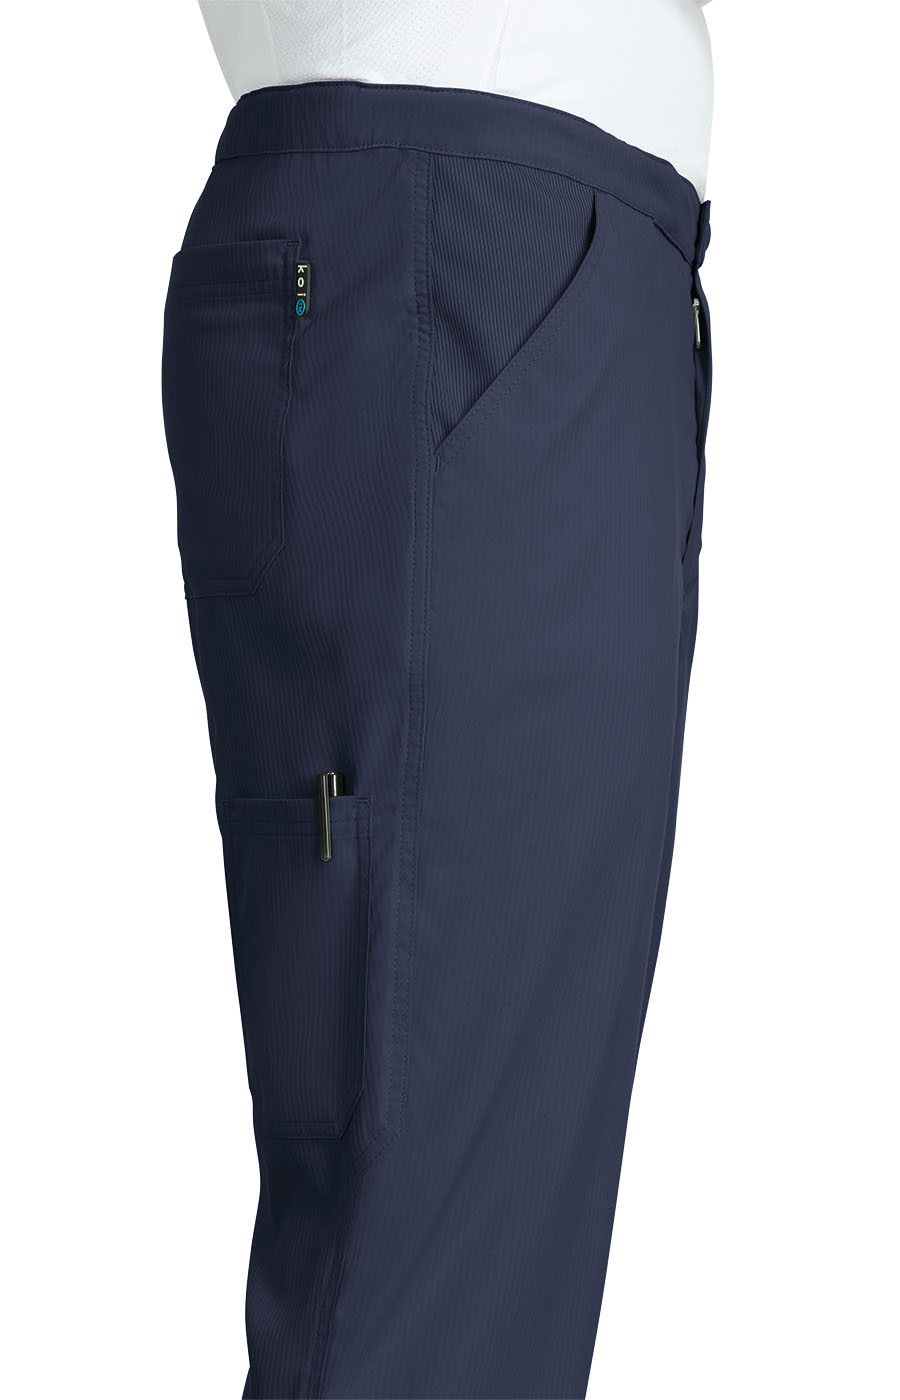 discovery-pant-navy